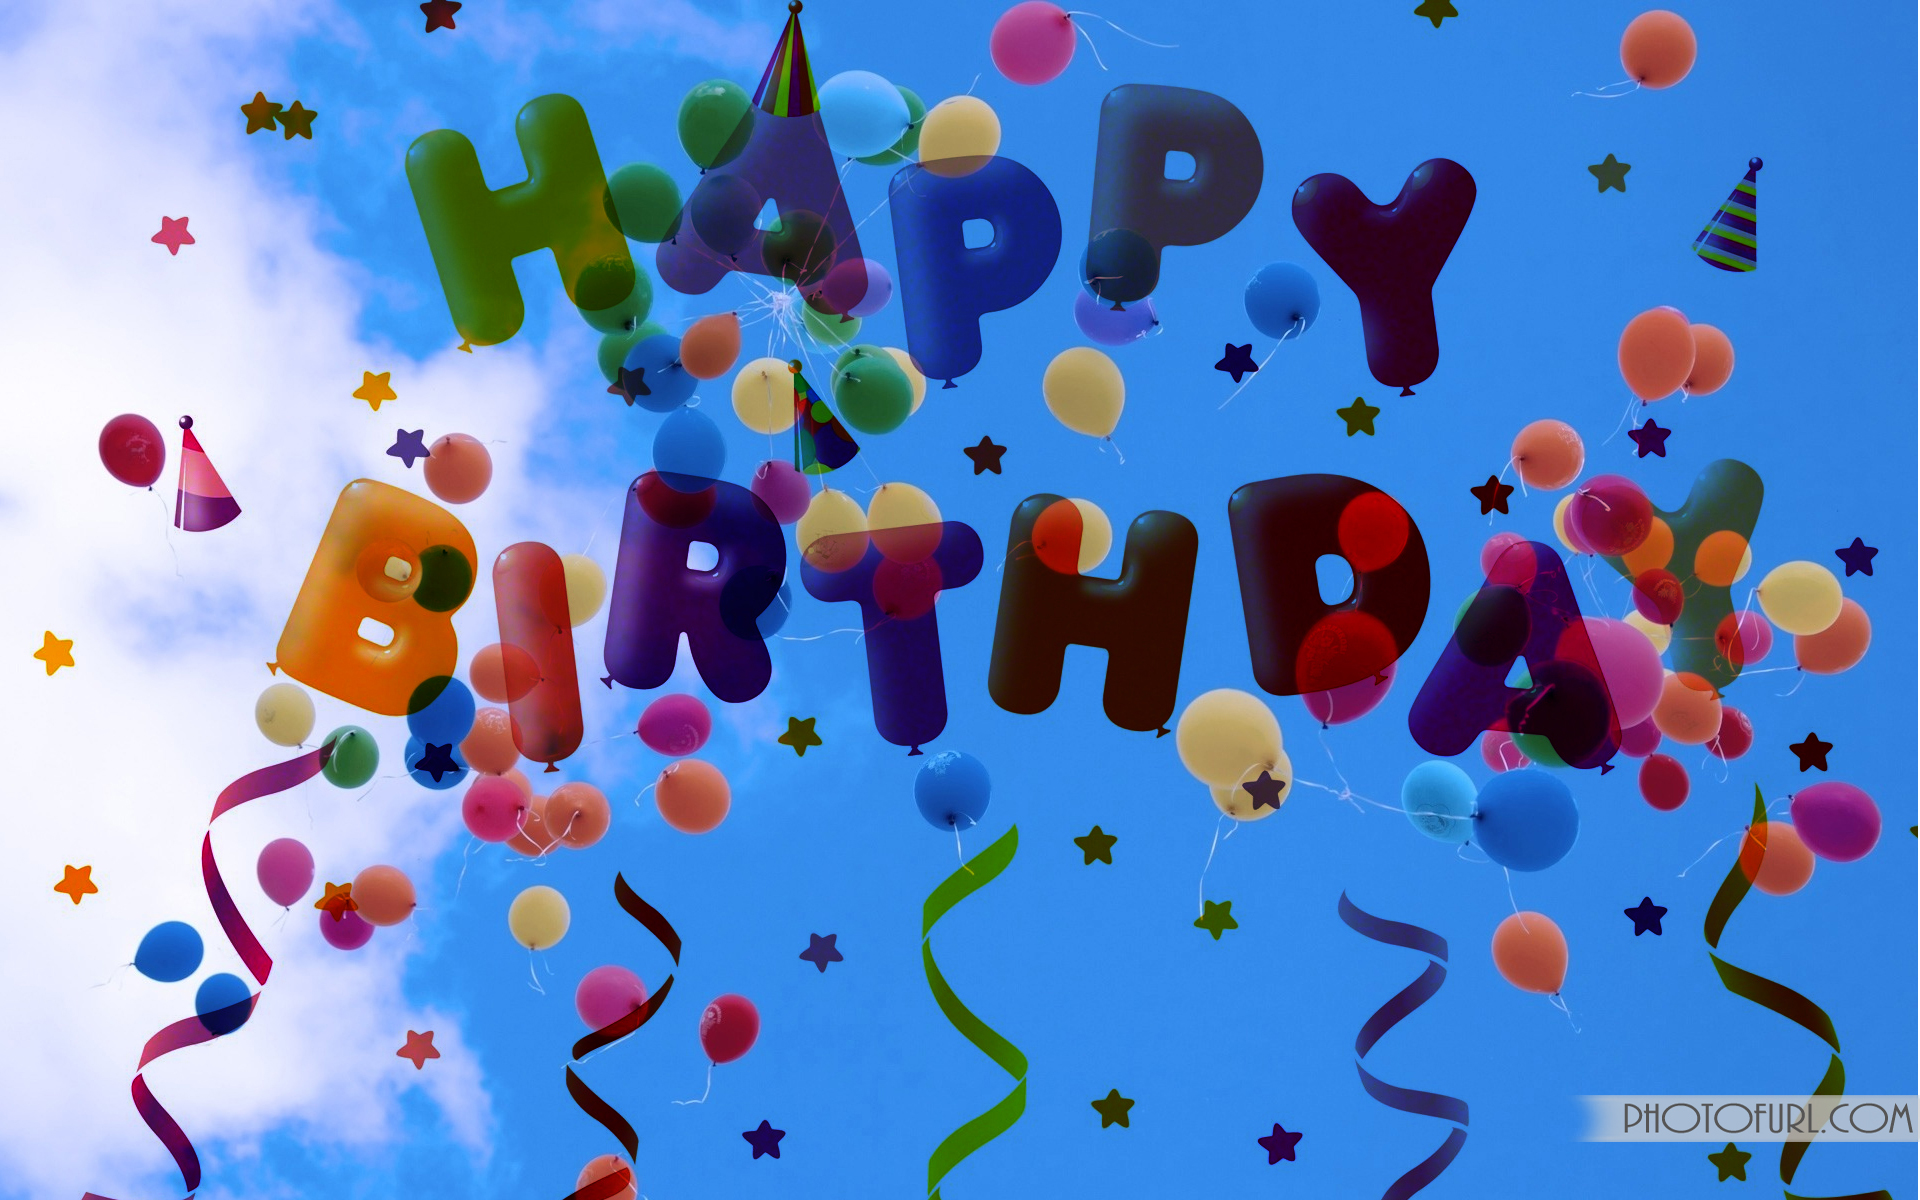 Happy Birthday Wishes Wallpapers Free Wallpapers - Happy Birthday Balloons For A Guy - HD Wallpaper 